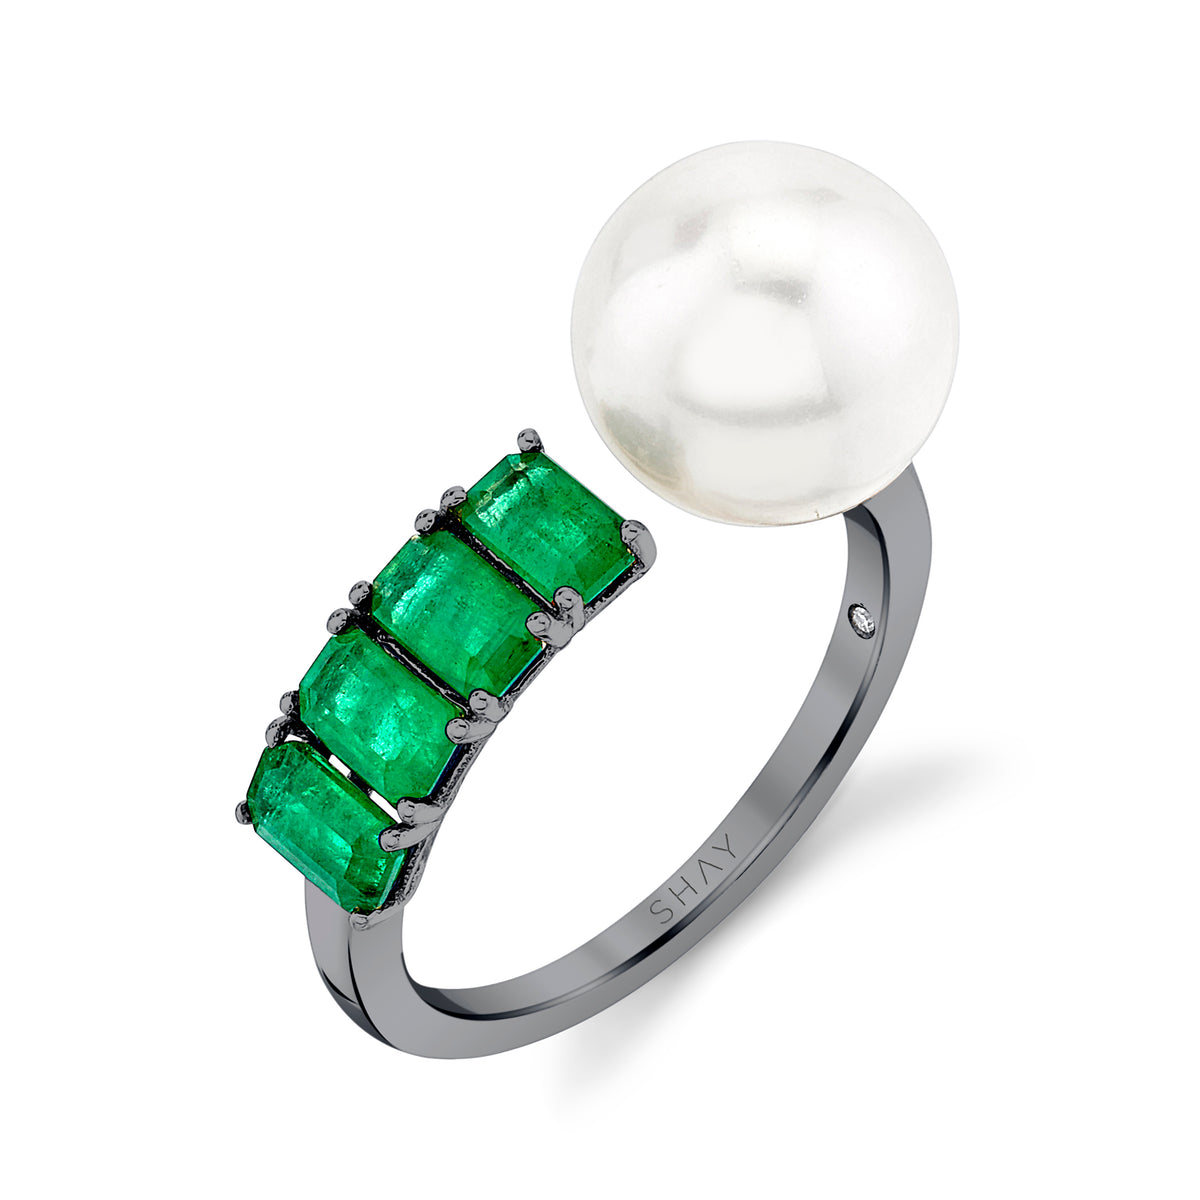 PEARL & EMERALD FLOATING RING